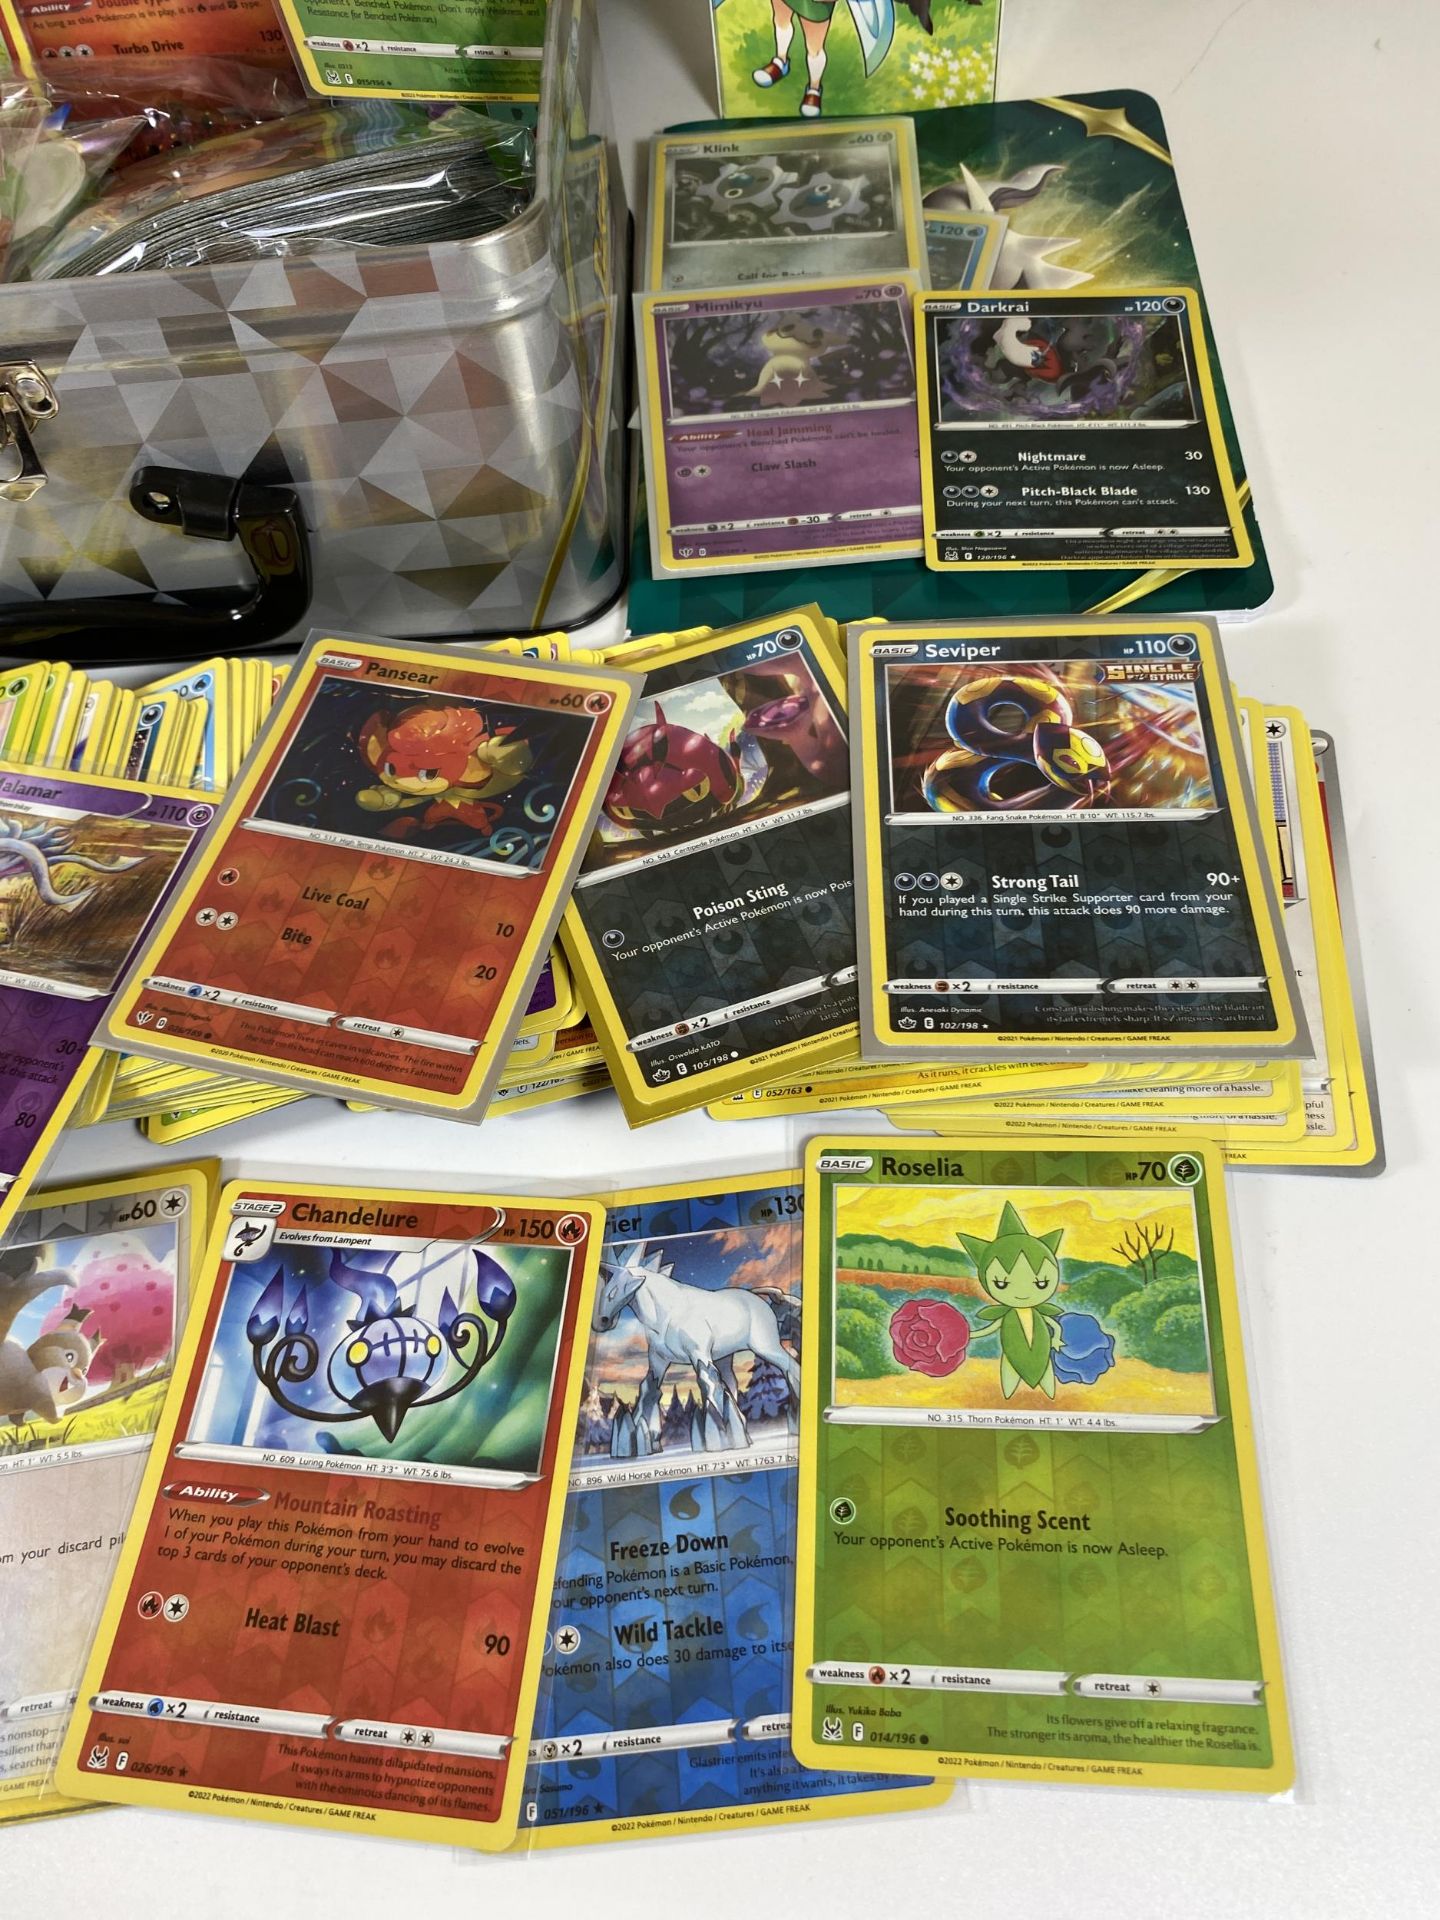 A POKEMON TIN TRAINER BOX FULL OF CARDS, GAME COUNTERS, RARES, HOLOS ETC - Image 5 of 5